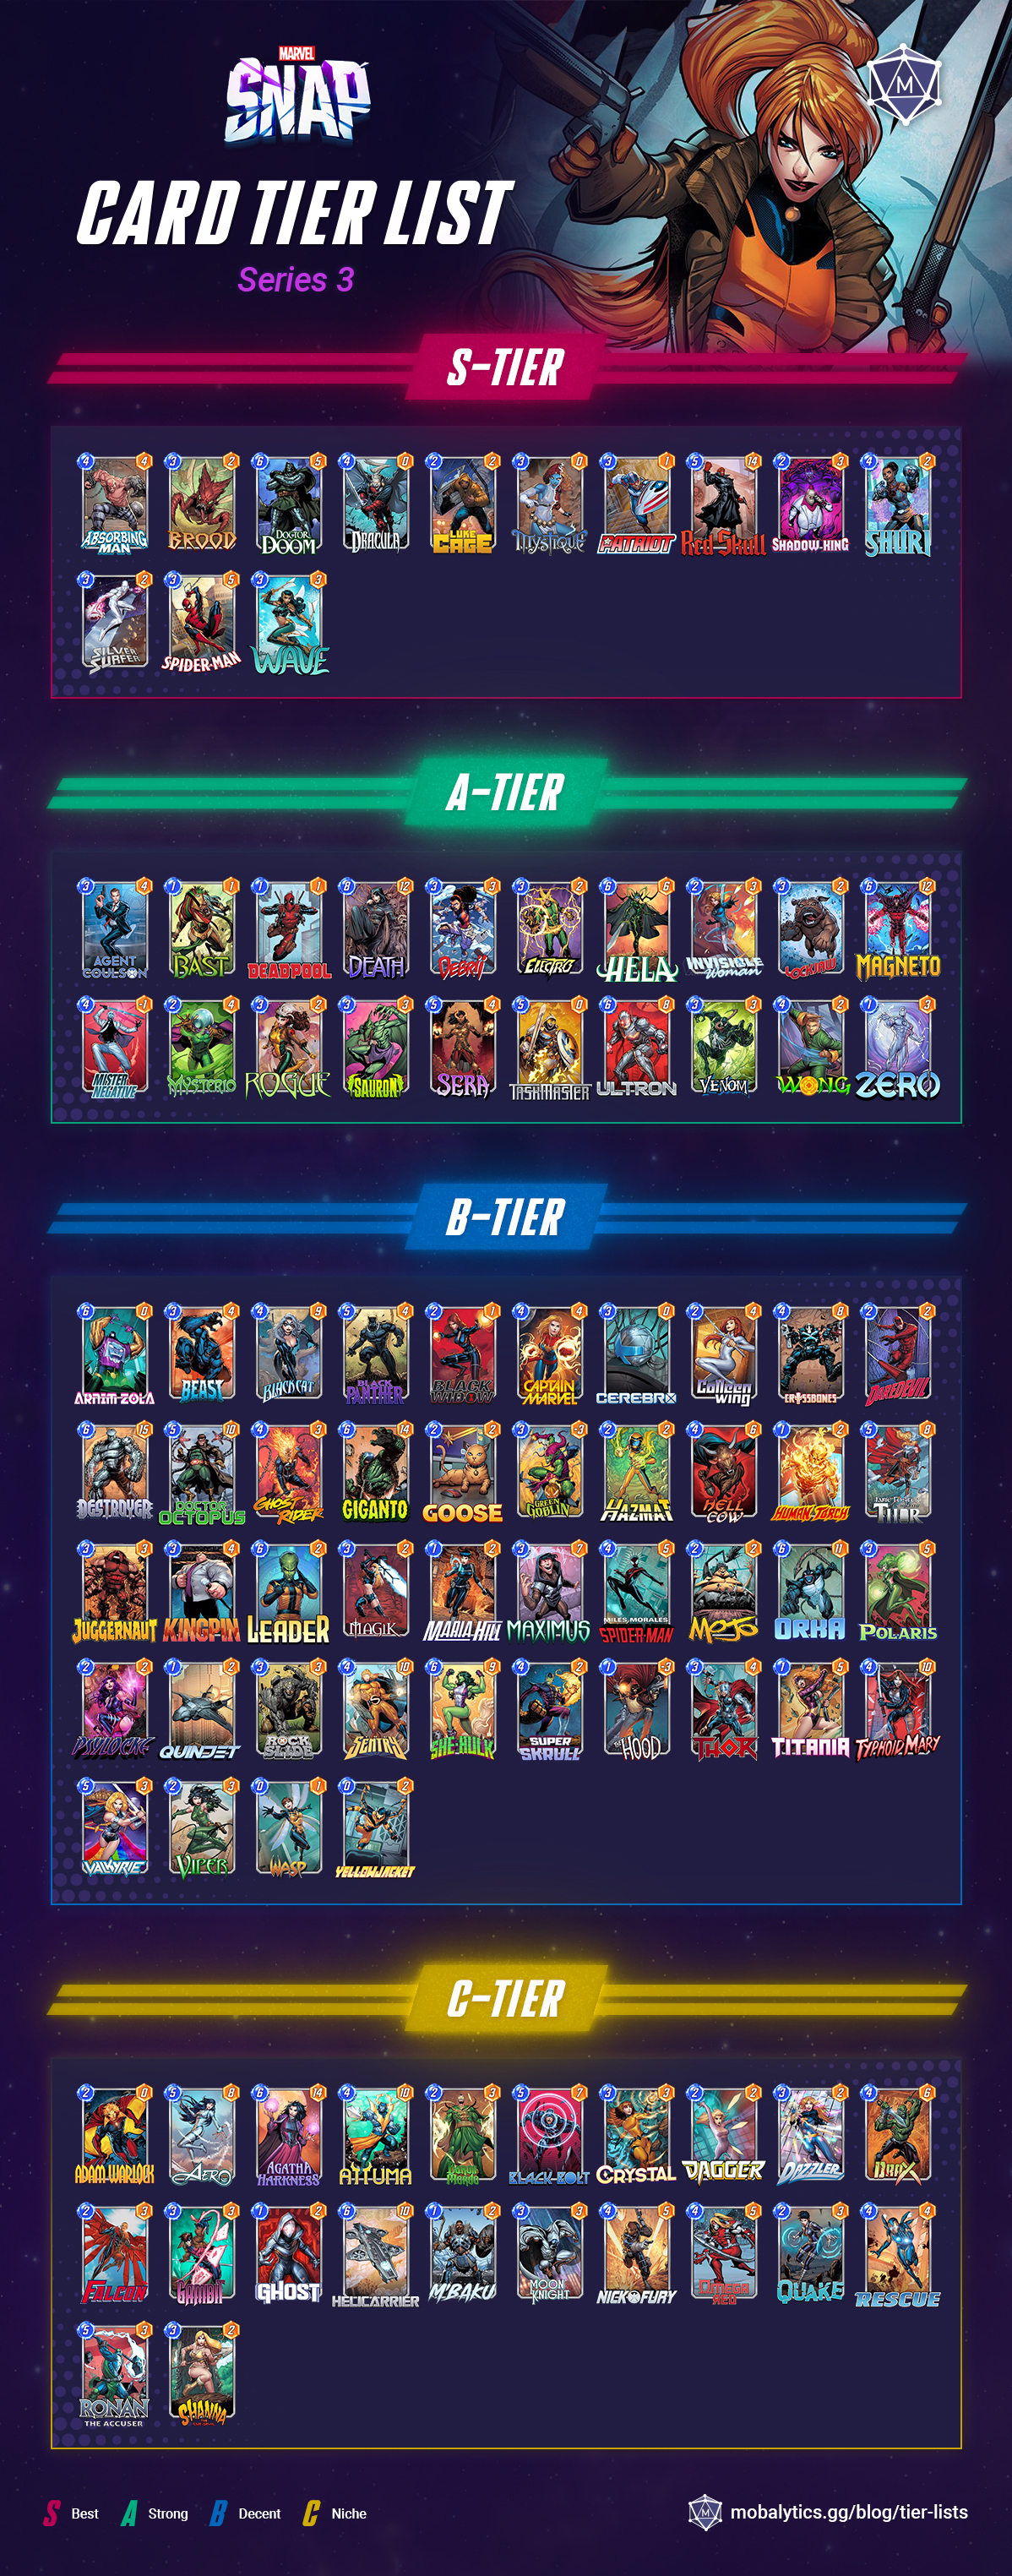 The ULTIMATE Search Engine Tier List (Based Tier to Surveillance Tier) 